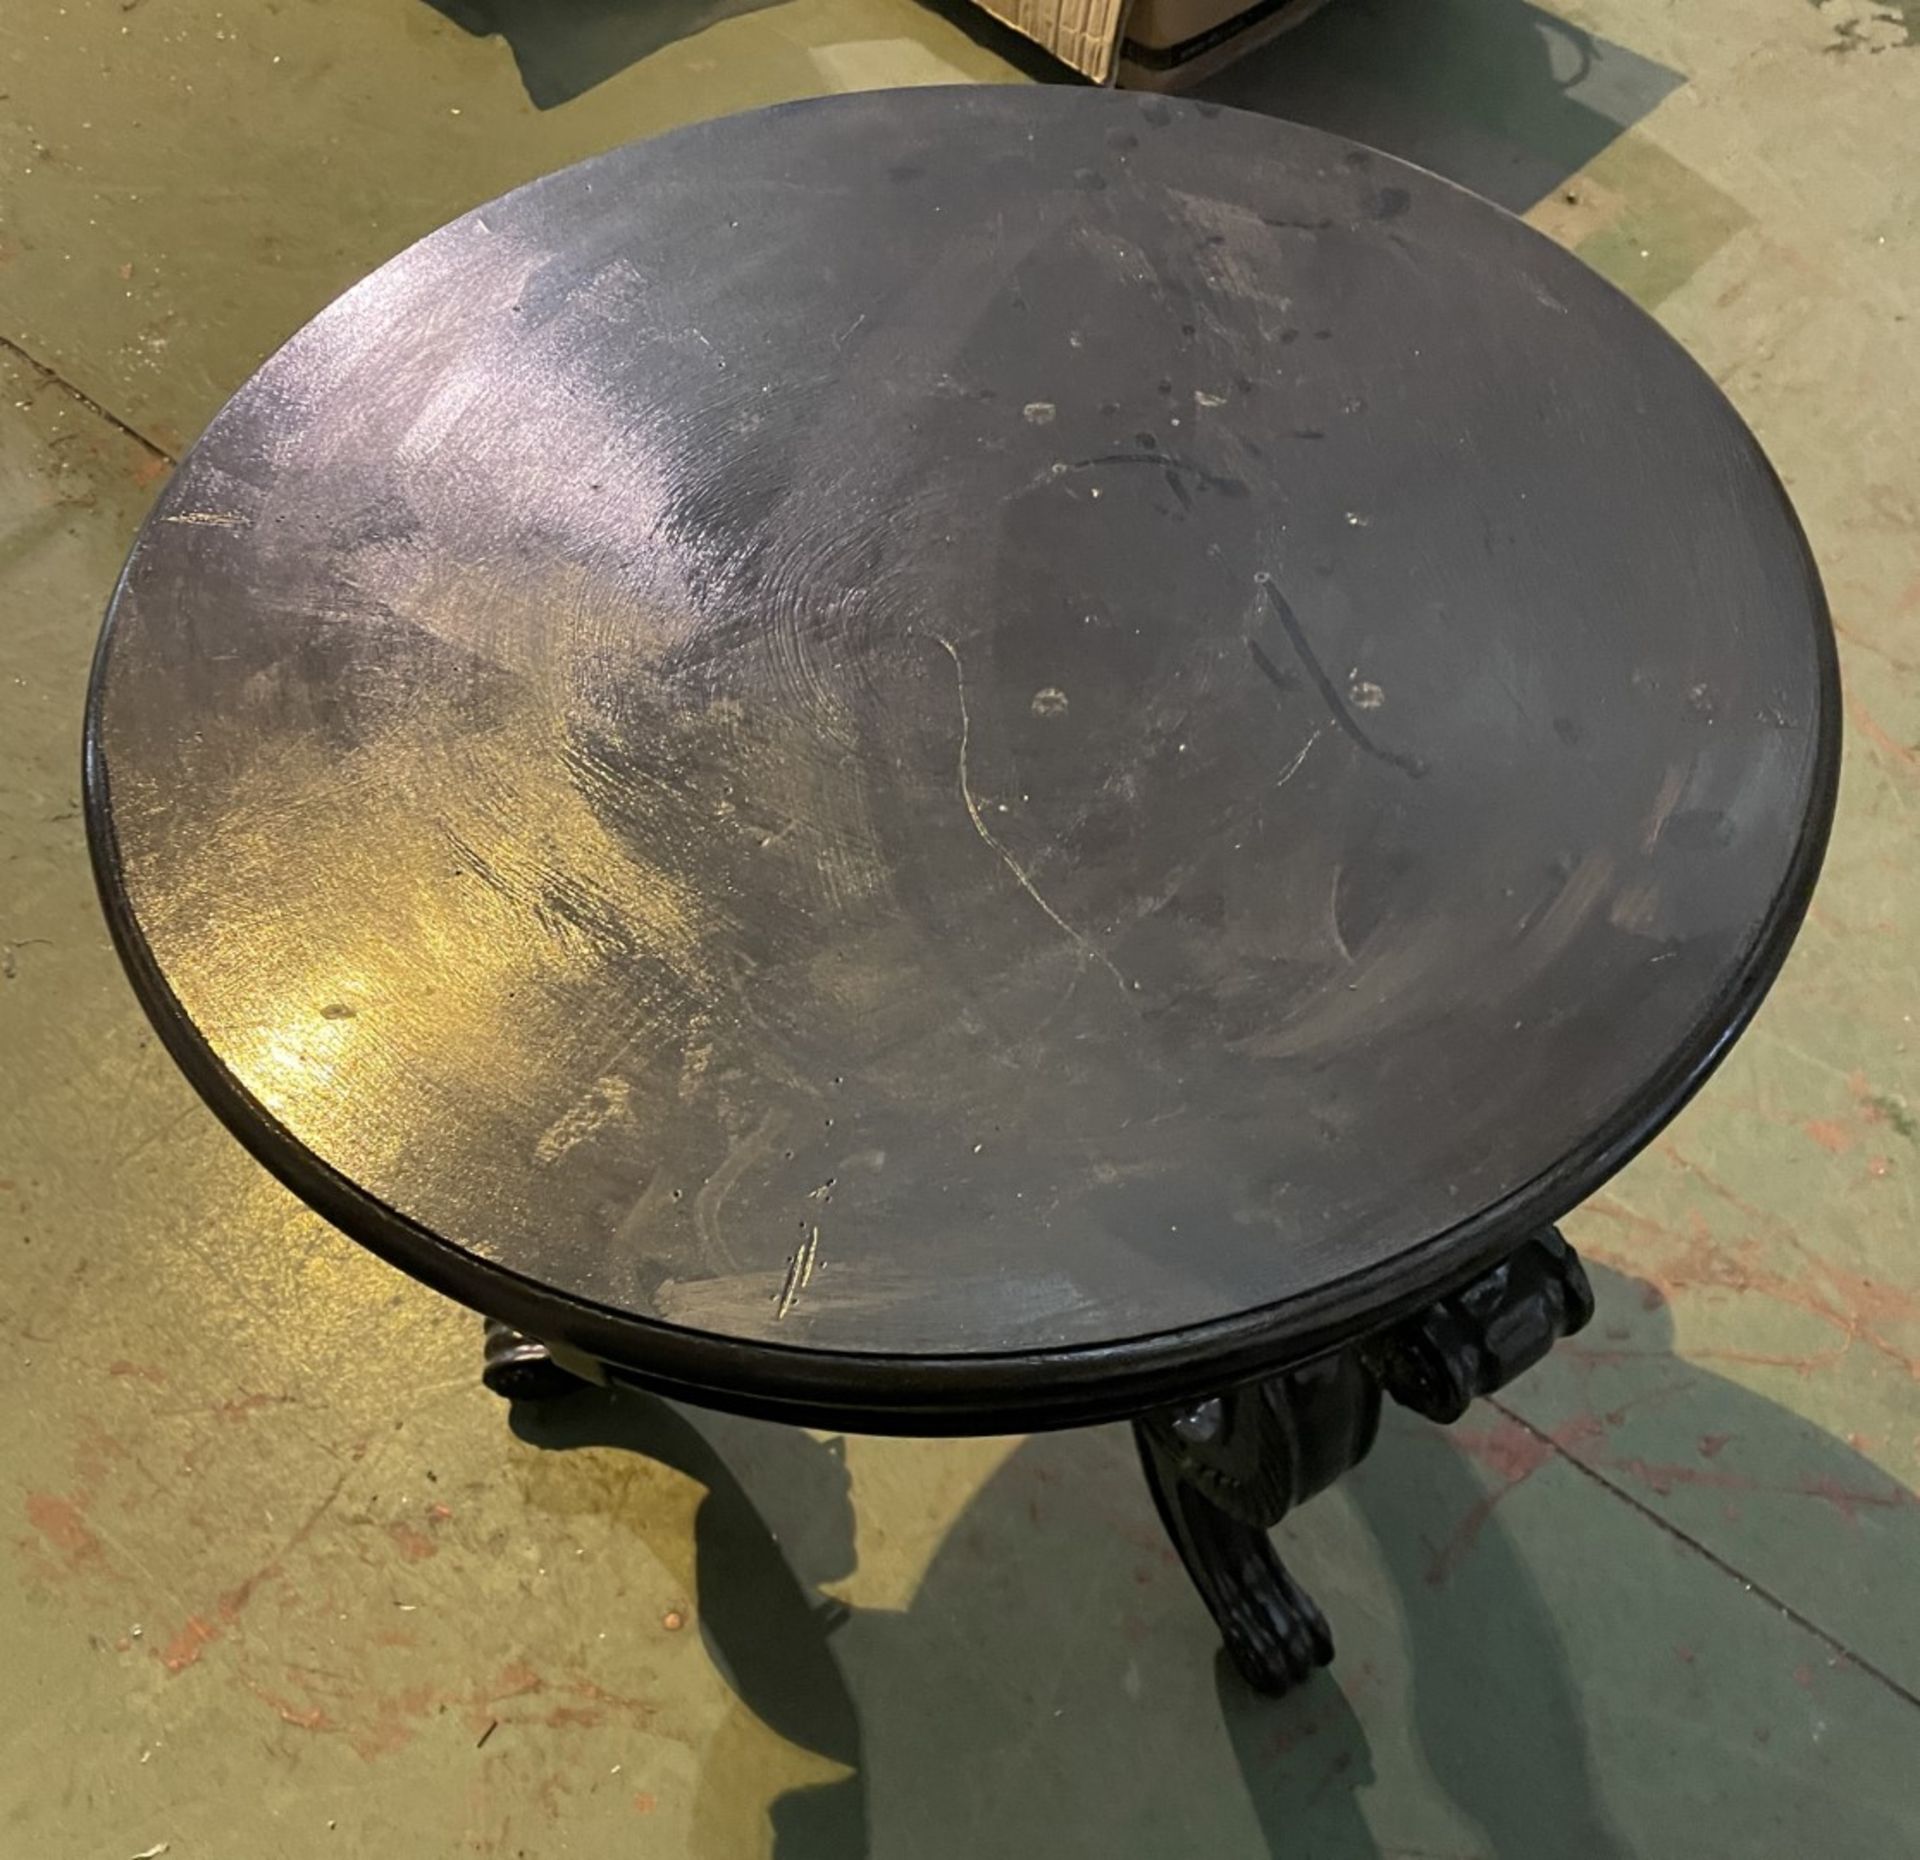 1 x Round Black Painted Wooden Table - Approx 70(D) X 70(H) Cm - Ref: J119 - CL531 - Location: - Image 5 of 5